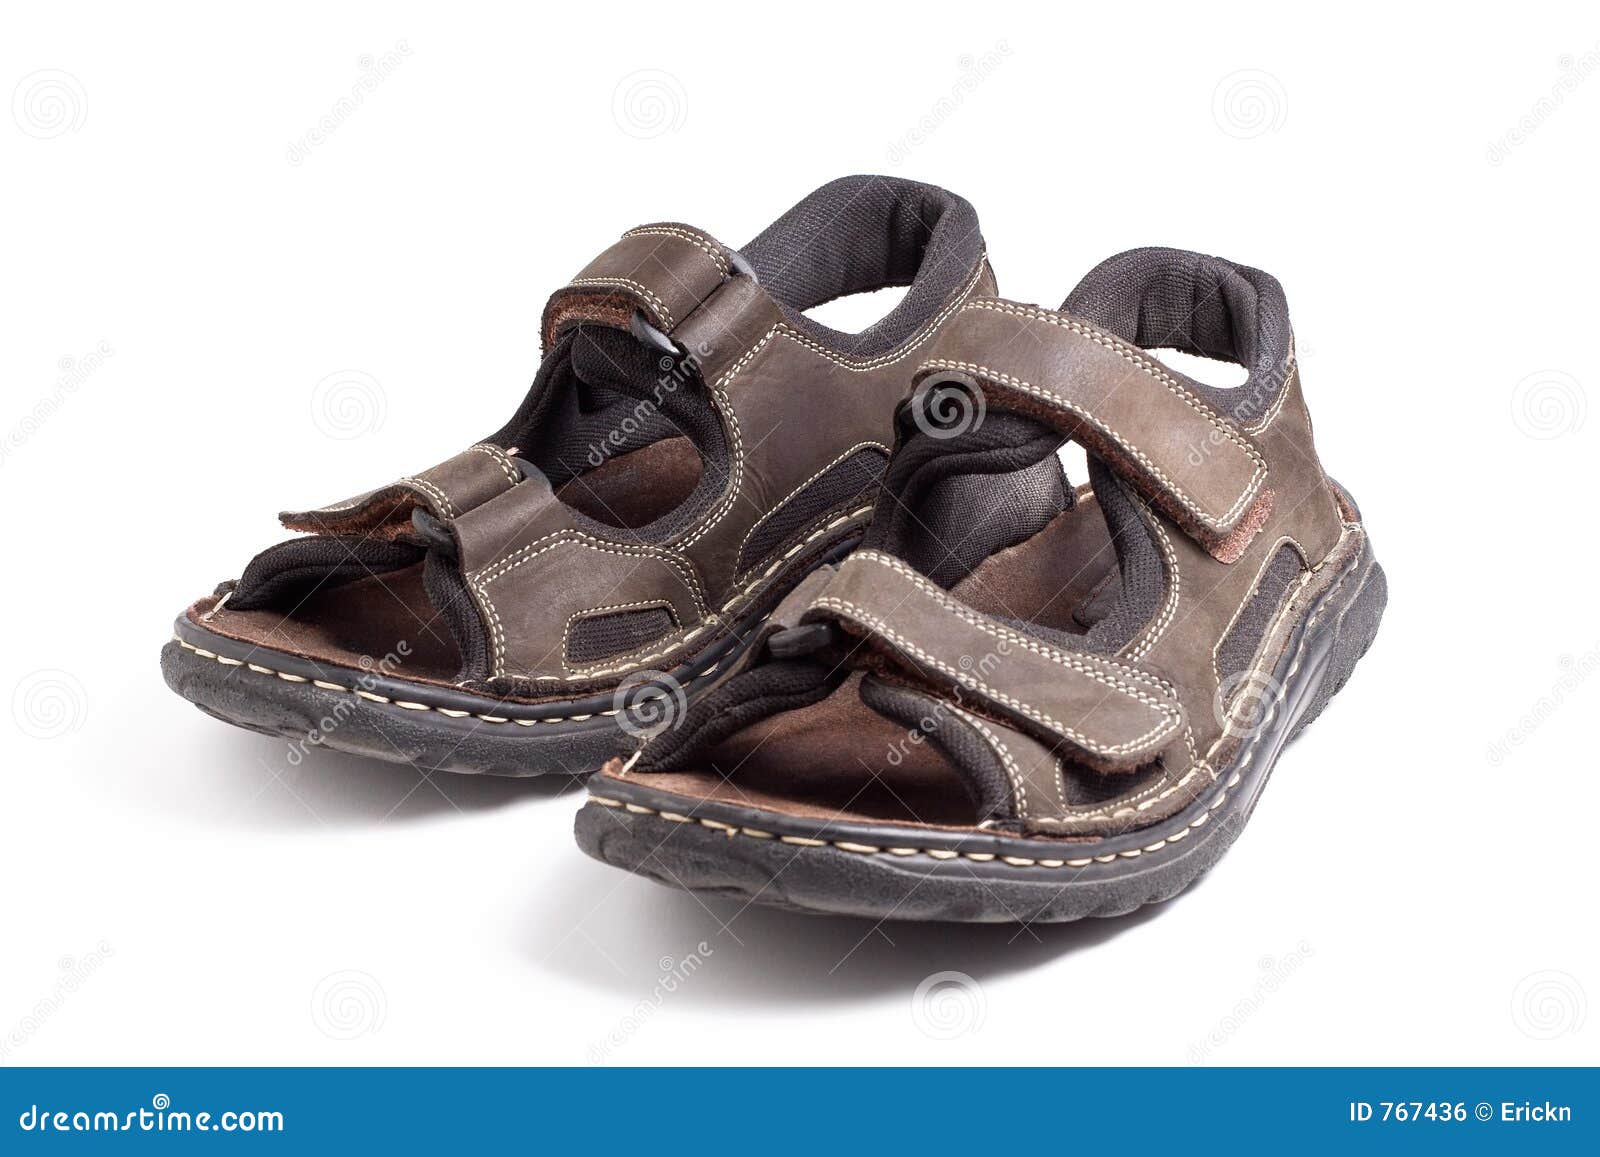 Hiking sandals stock photo. Image of leather, sportswear - 767436